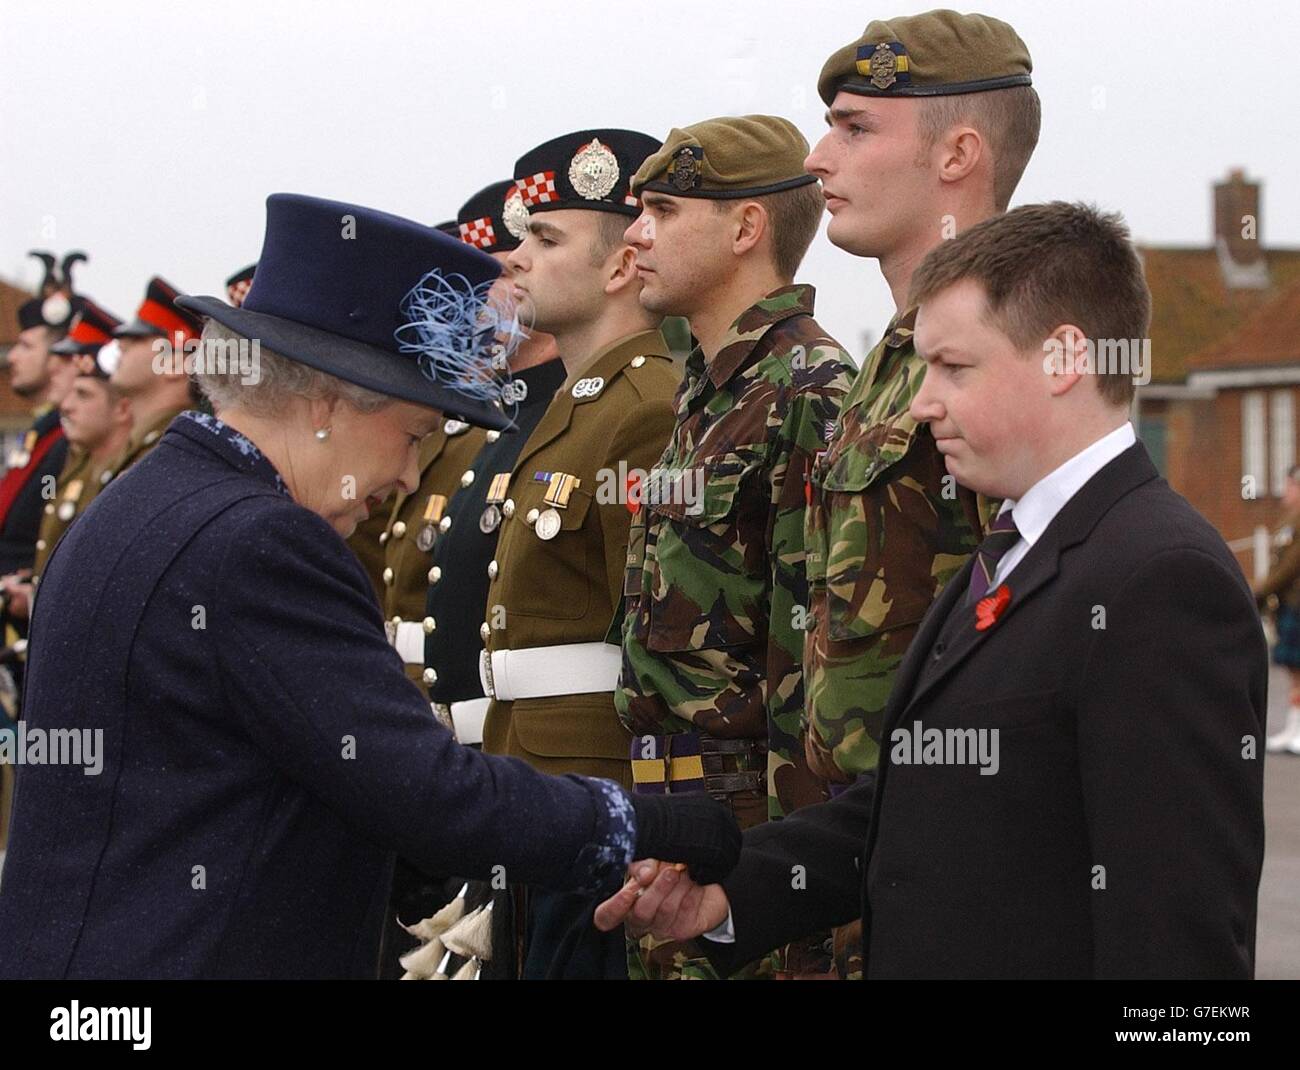 Queen Elizabeth II presents an Iraq campaign medal to Lance Corporal Gary Hannah at Howe Barracks in Canterbury, Kent where she also presented the 1st Battalion of The Argyll and Sutherland Highlanders with the Wilkinson Sword of Peace for establishing good relations with communities during their service in Iraq. Stock Photo